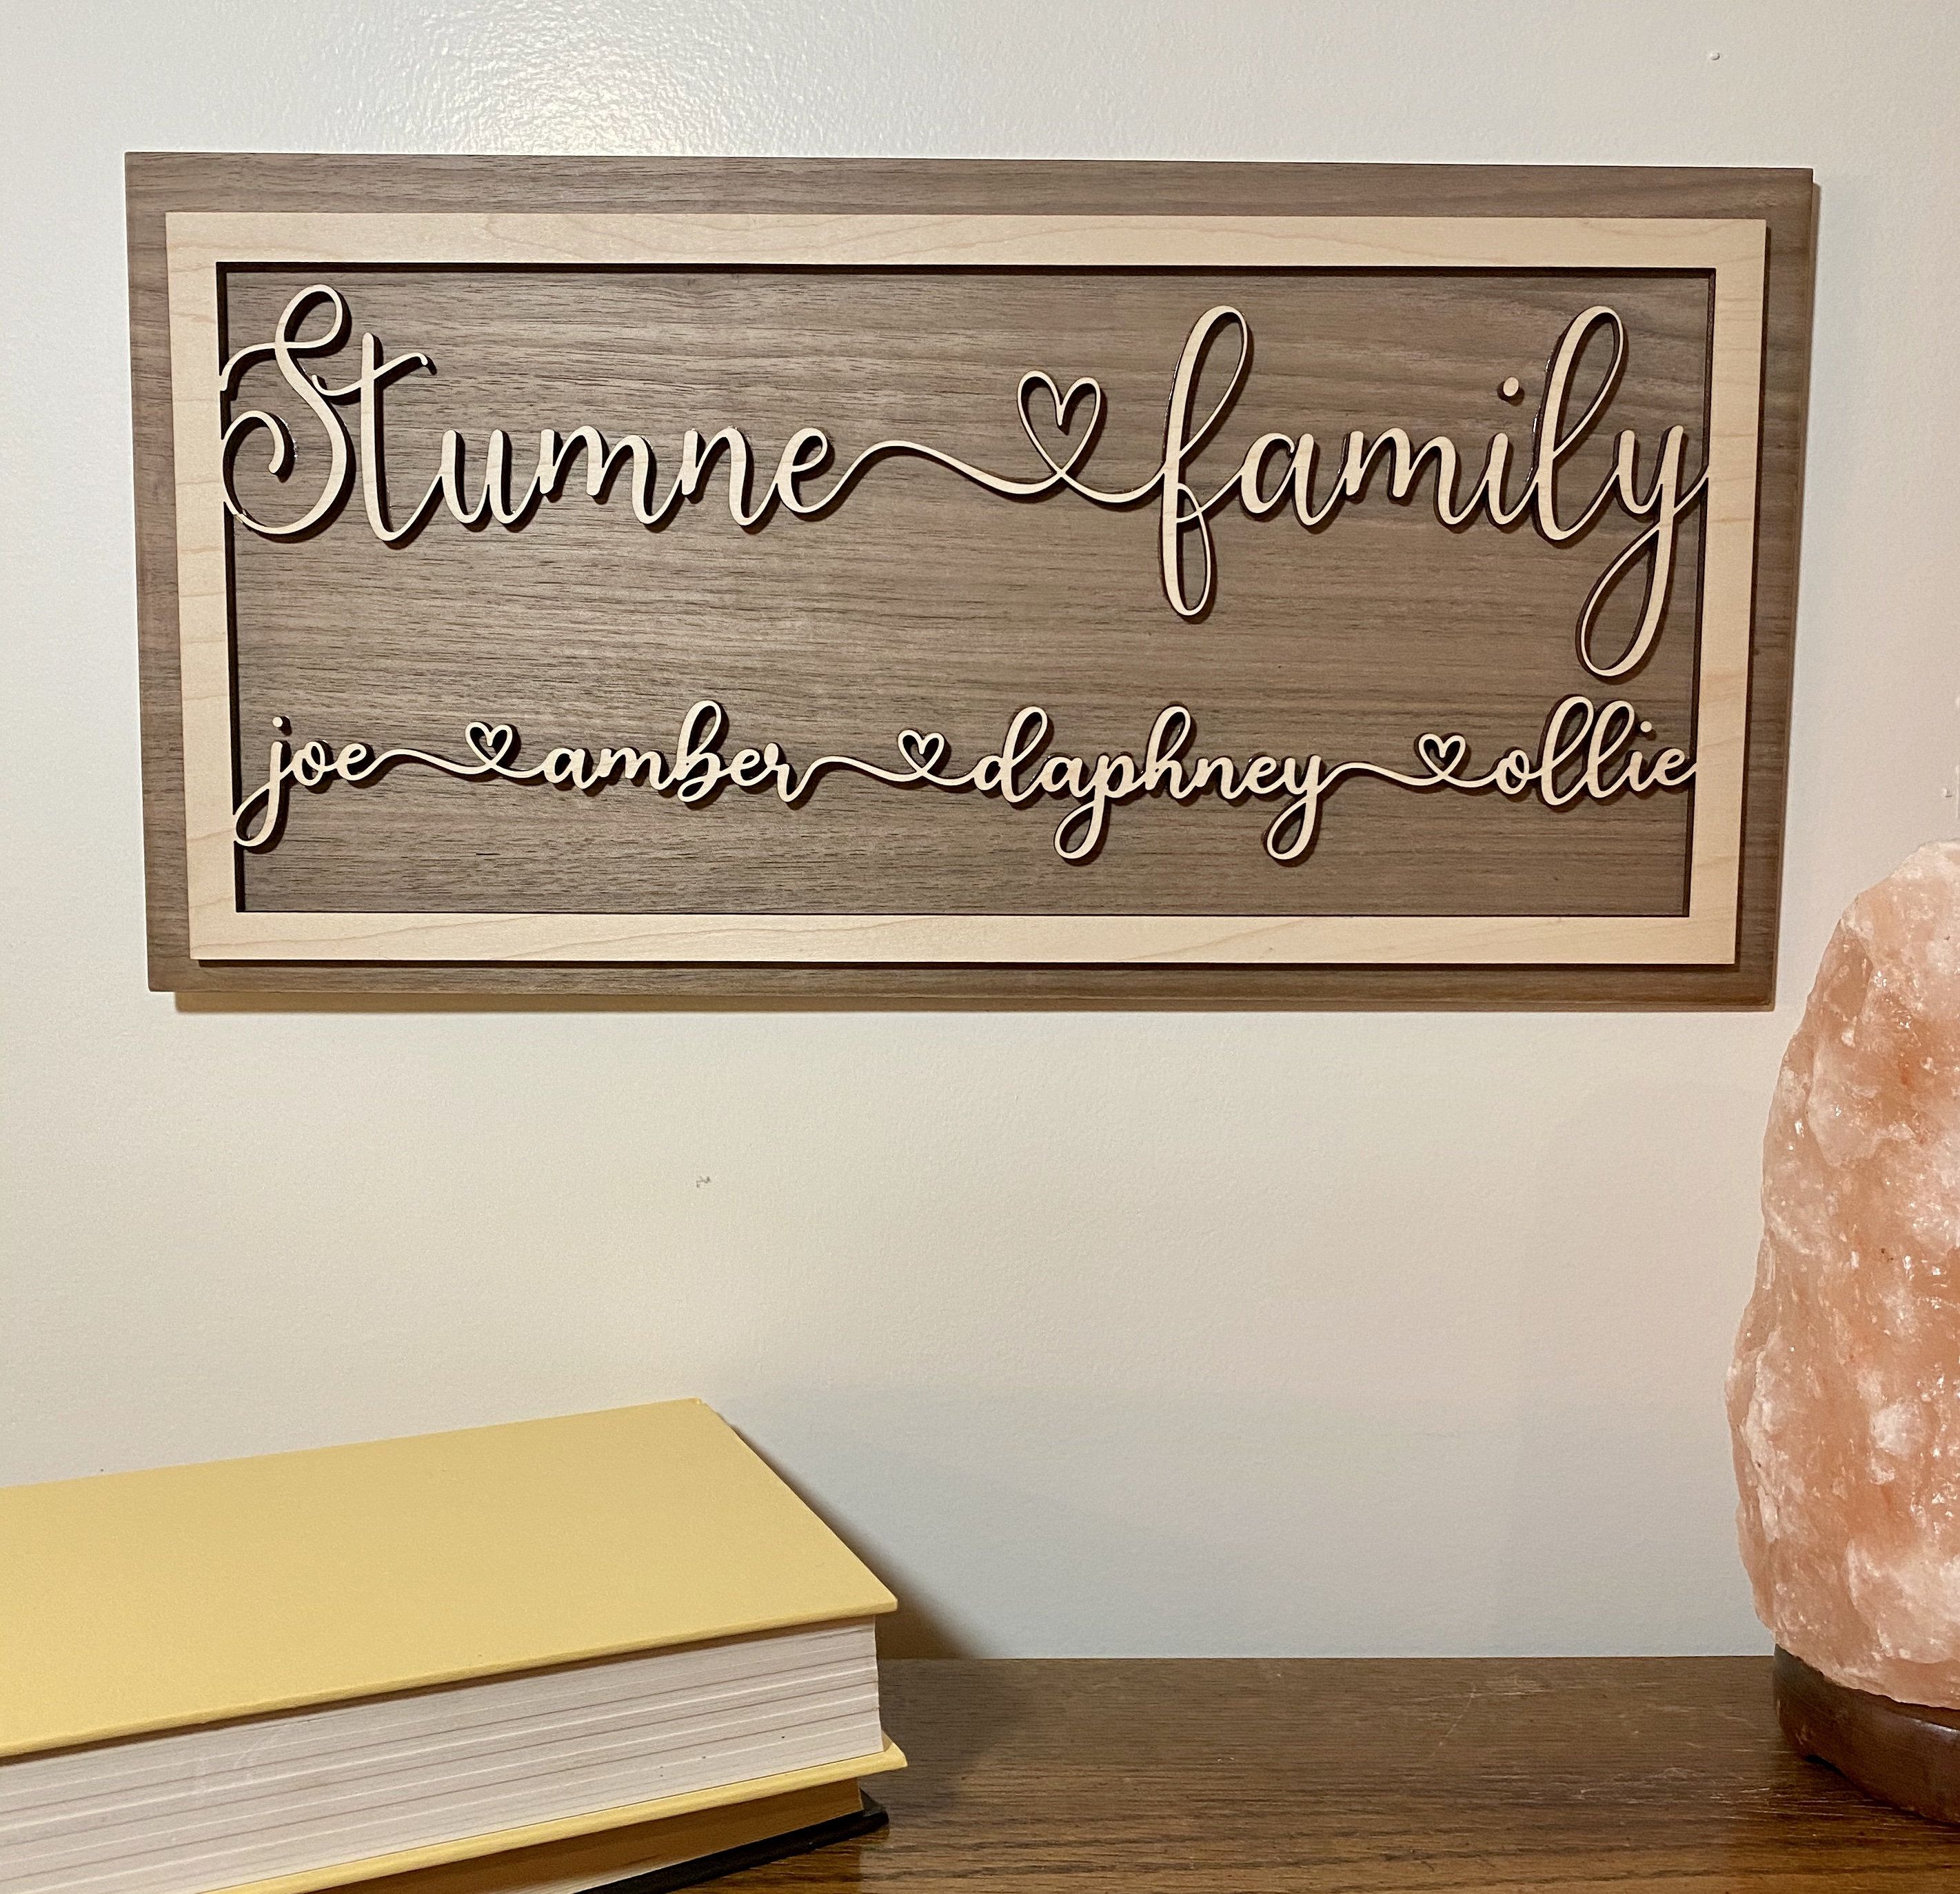 Personalized Wooden Signs from GiftedOccasion #homedeco #woodensigns #personalizedgifts